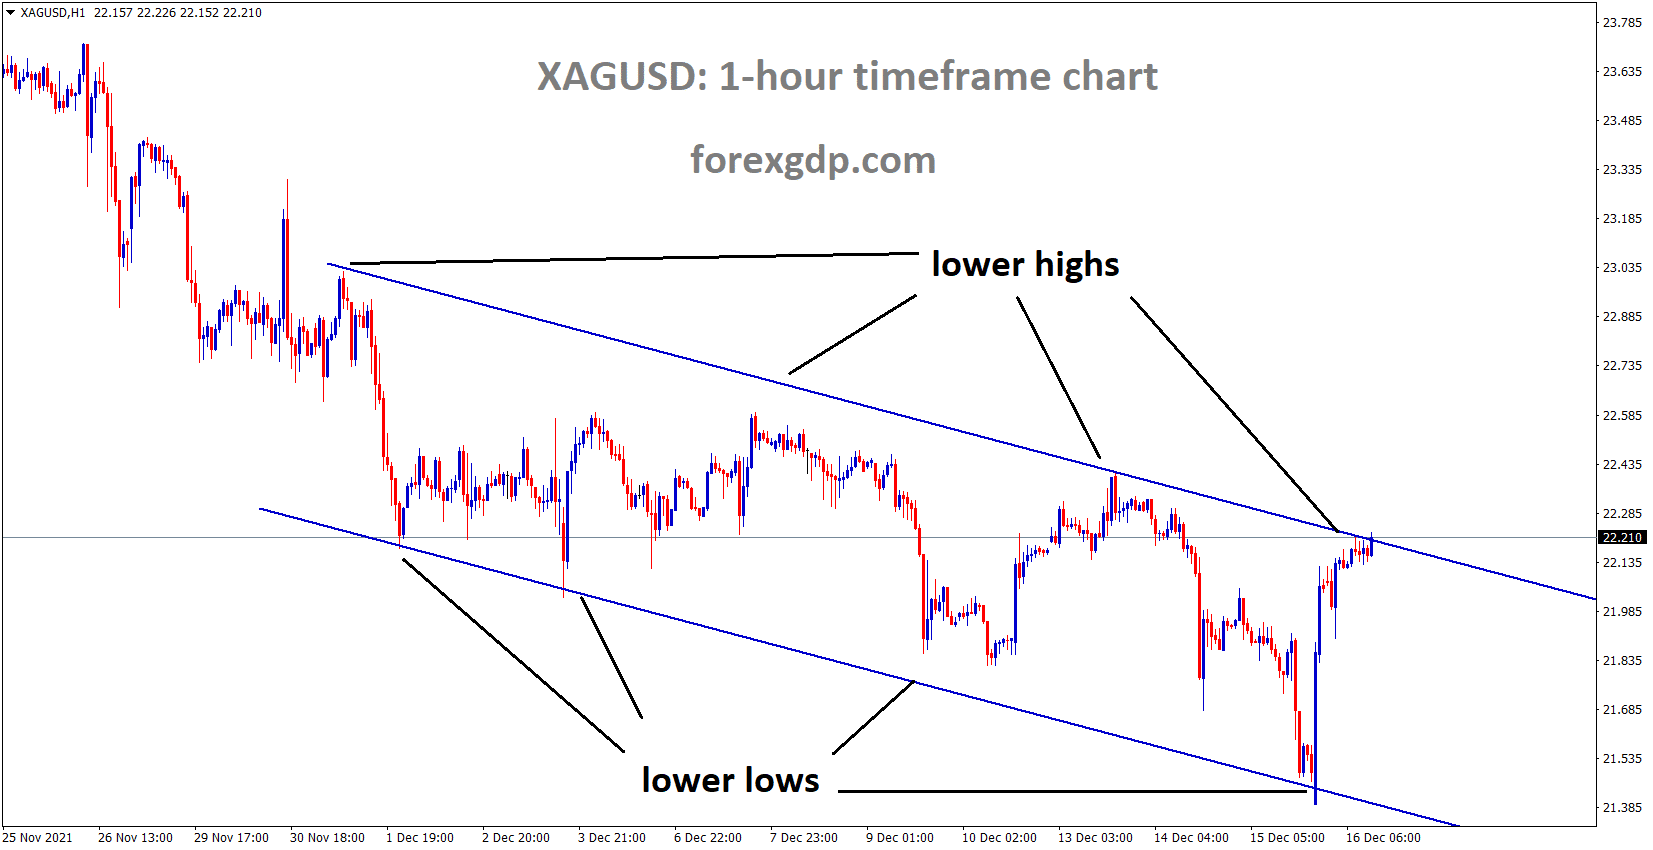 XAGUSD Silver price is moving in the Descending channel and the market reached the lower higher area of the channel